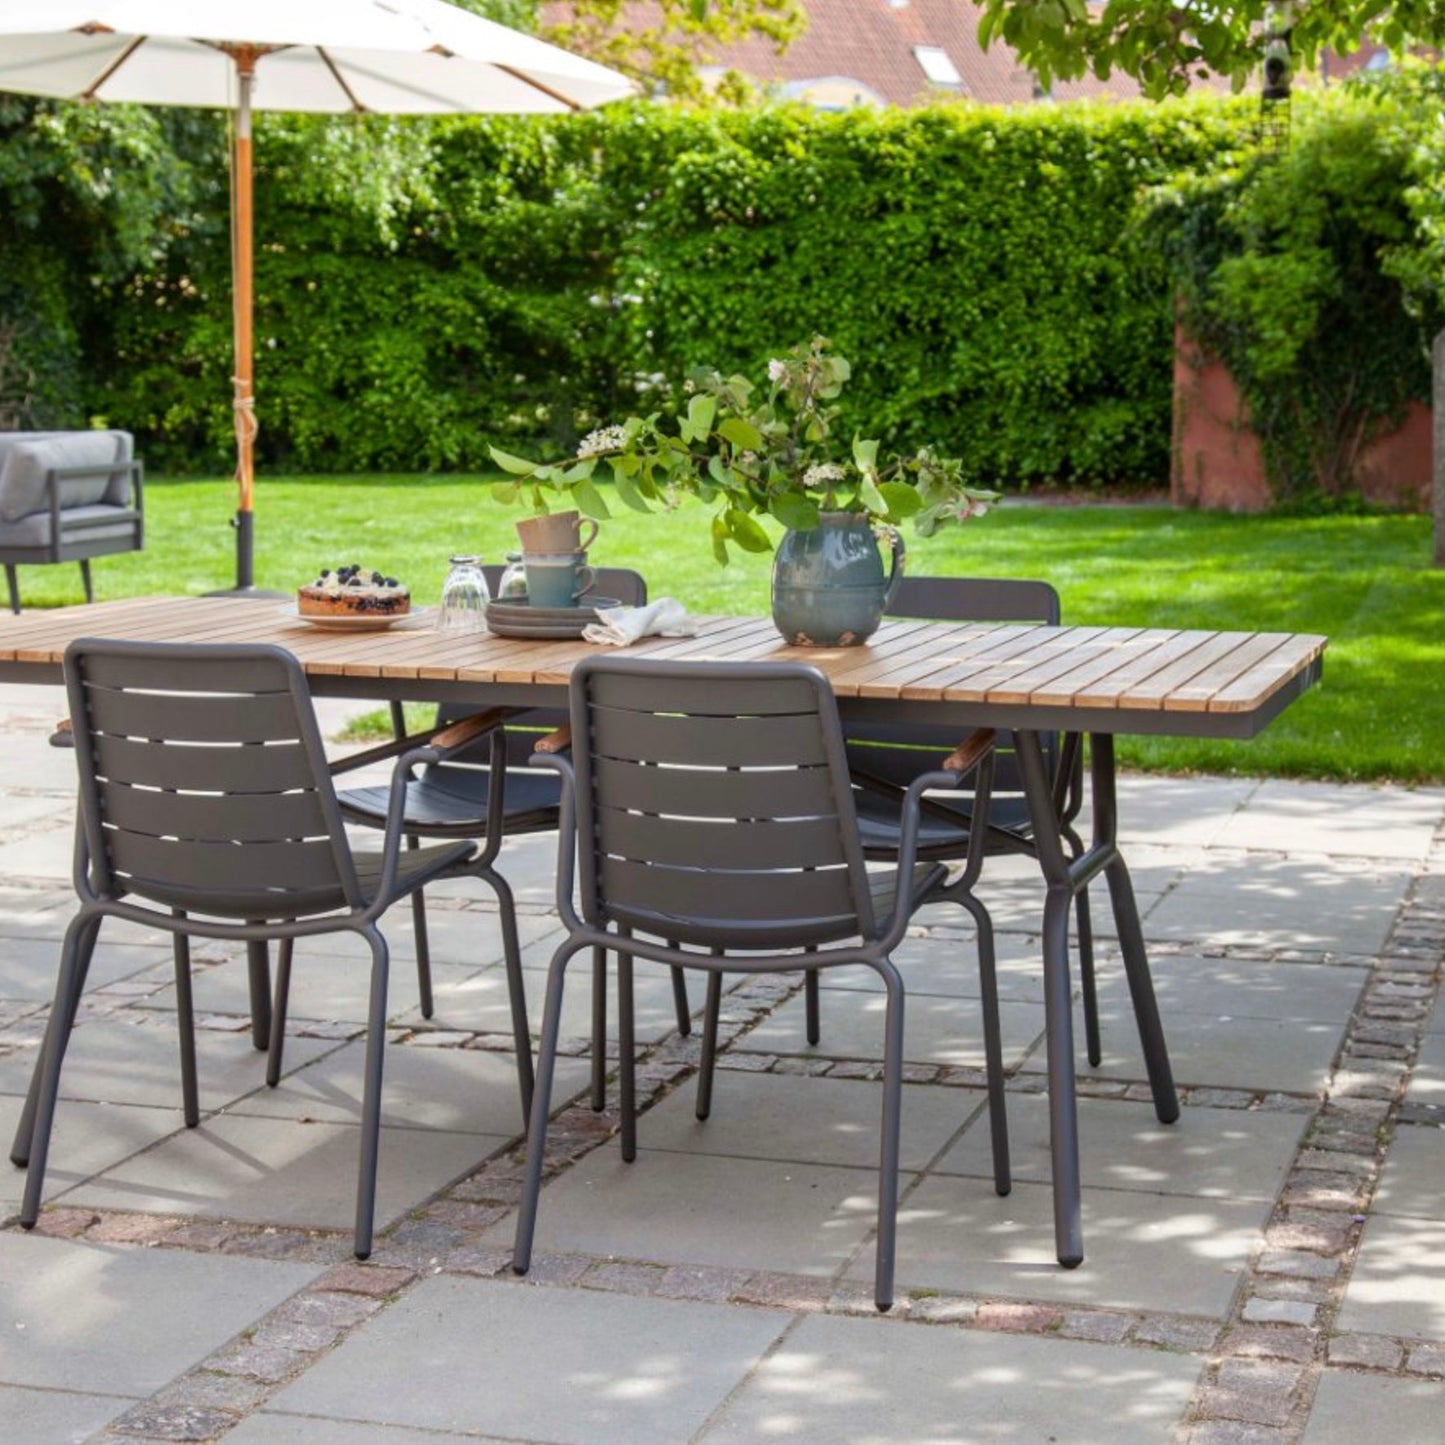 'Parc' garden furniture set: garden table and 4 chairs